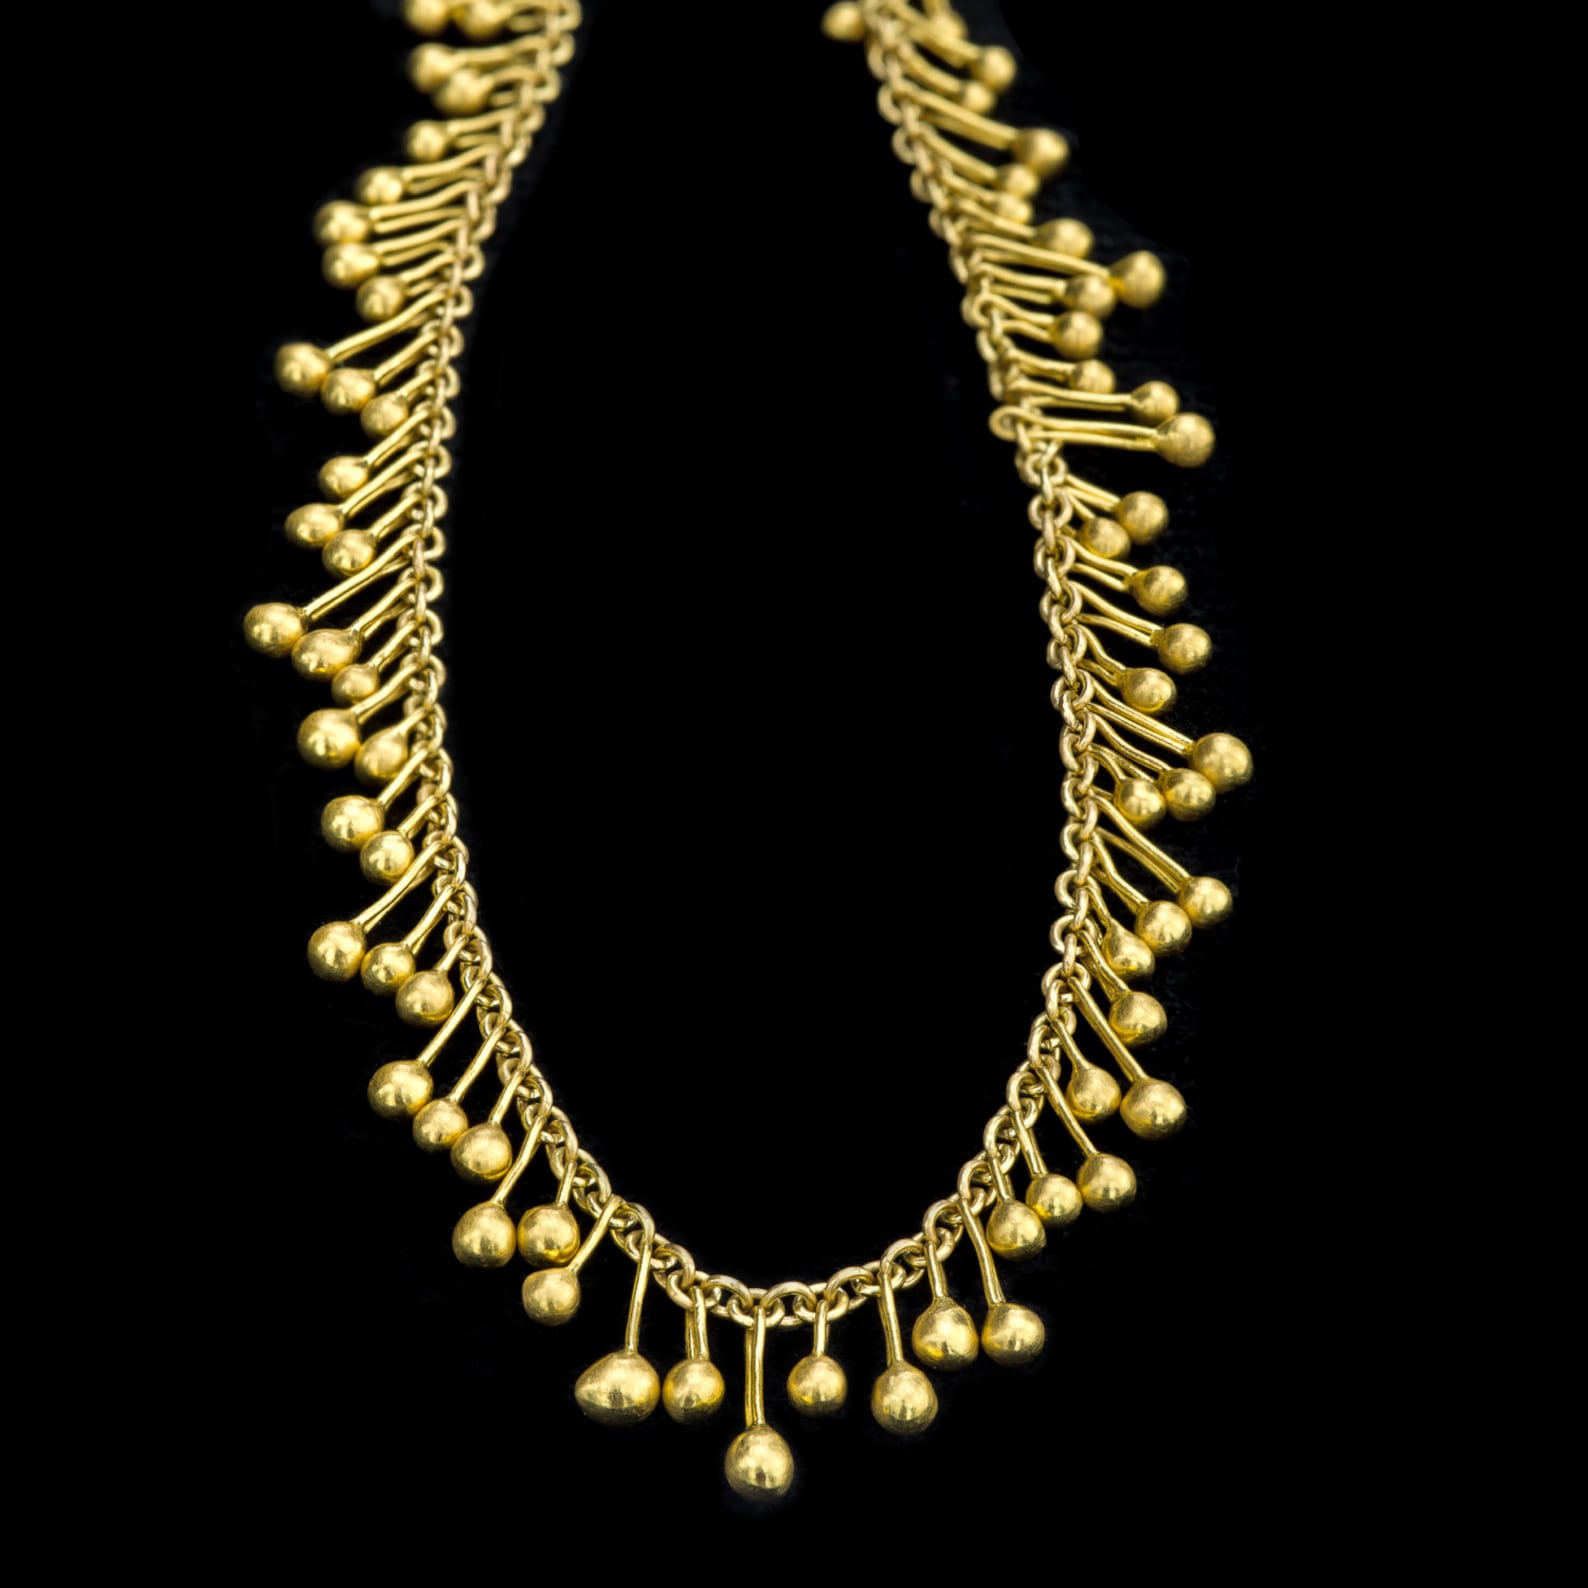 Dancing 22k Solid Gold Drops on 18k Chain Necklace Delicate & - Etsy